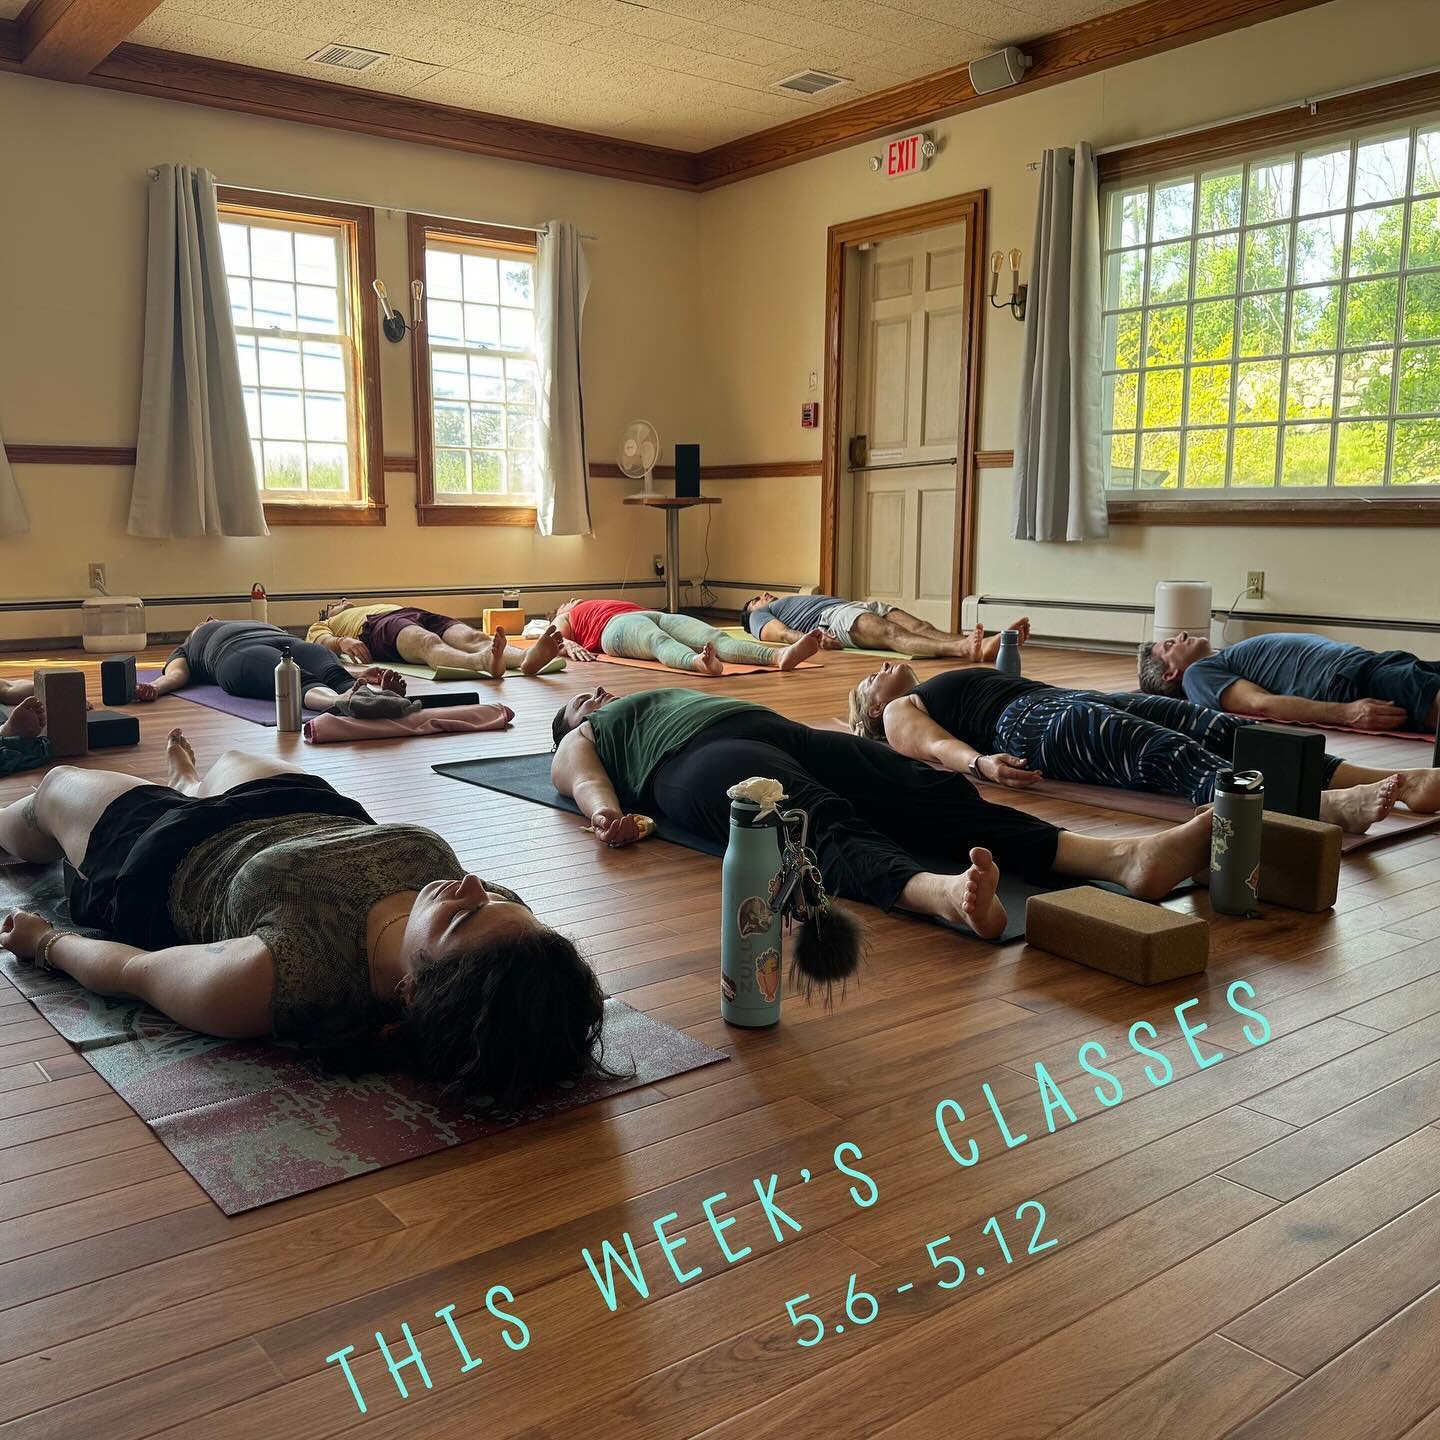 We are so excited about the turnout so far at our new location at Wilcox Tavern! We&rsquo;re also SO thrilled about all the new and familiar faces we&rsquo;ve been seeing at our Kingston spot! 

Check out this week&rsquo;s classes and visit us anytim